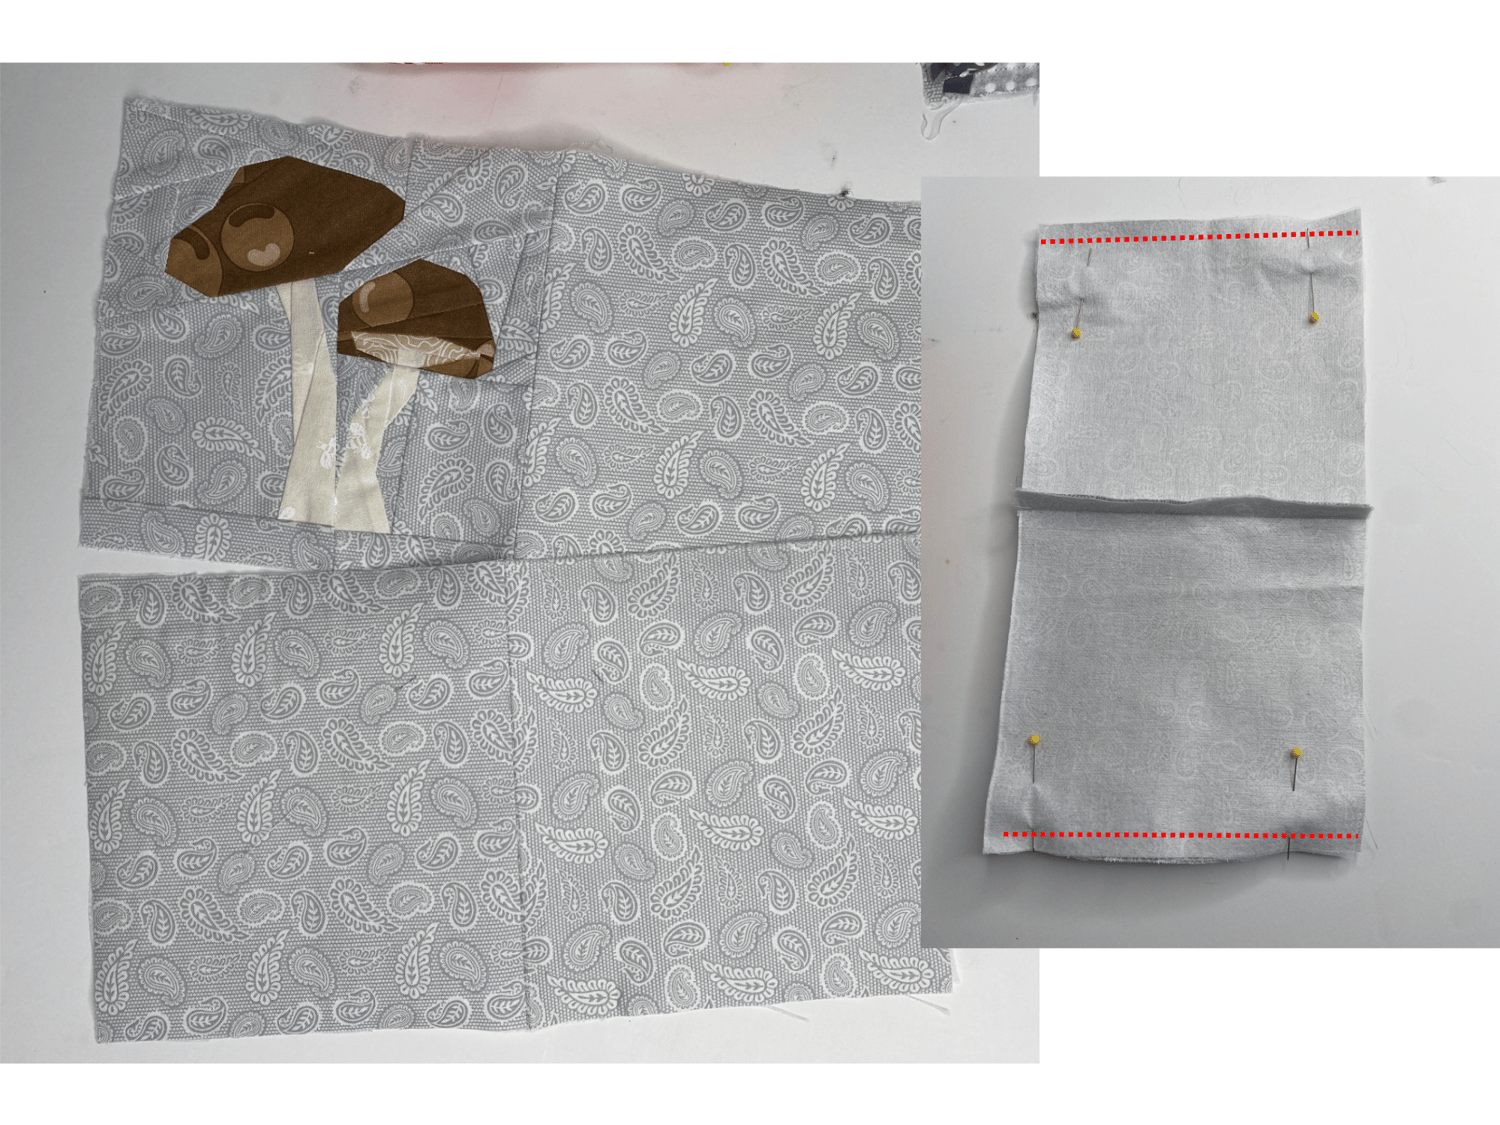 Sew your mushroom quilt block together with another fabric square and then use the remaining squares to create a loop for the outside casing of your fabric storage cube,